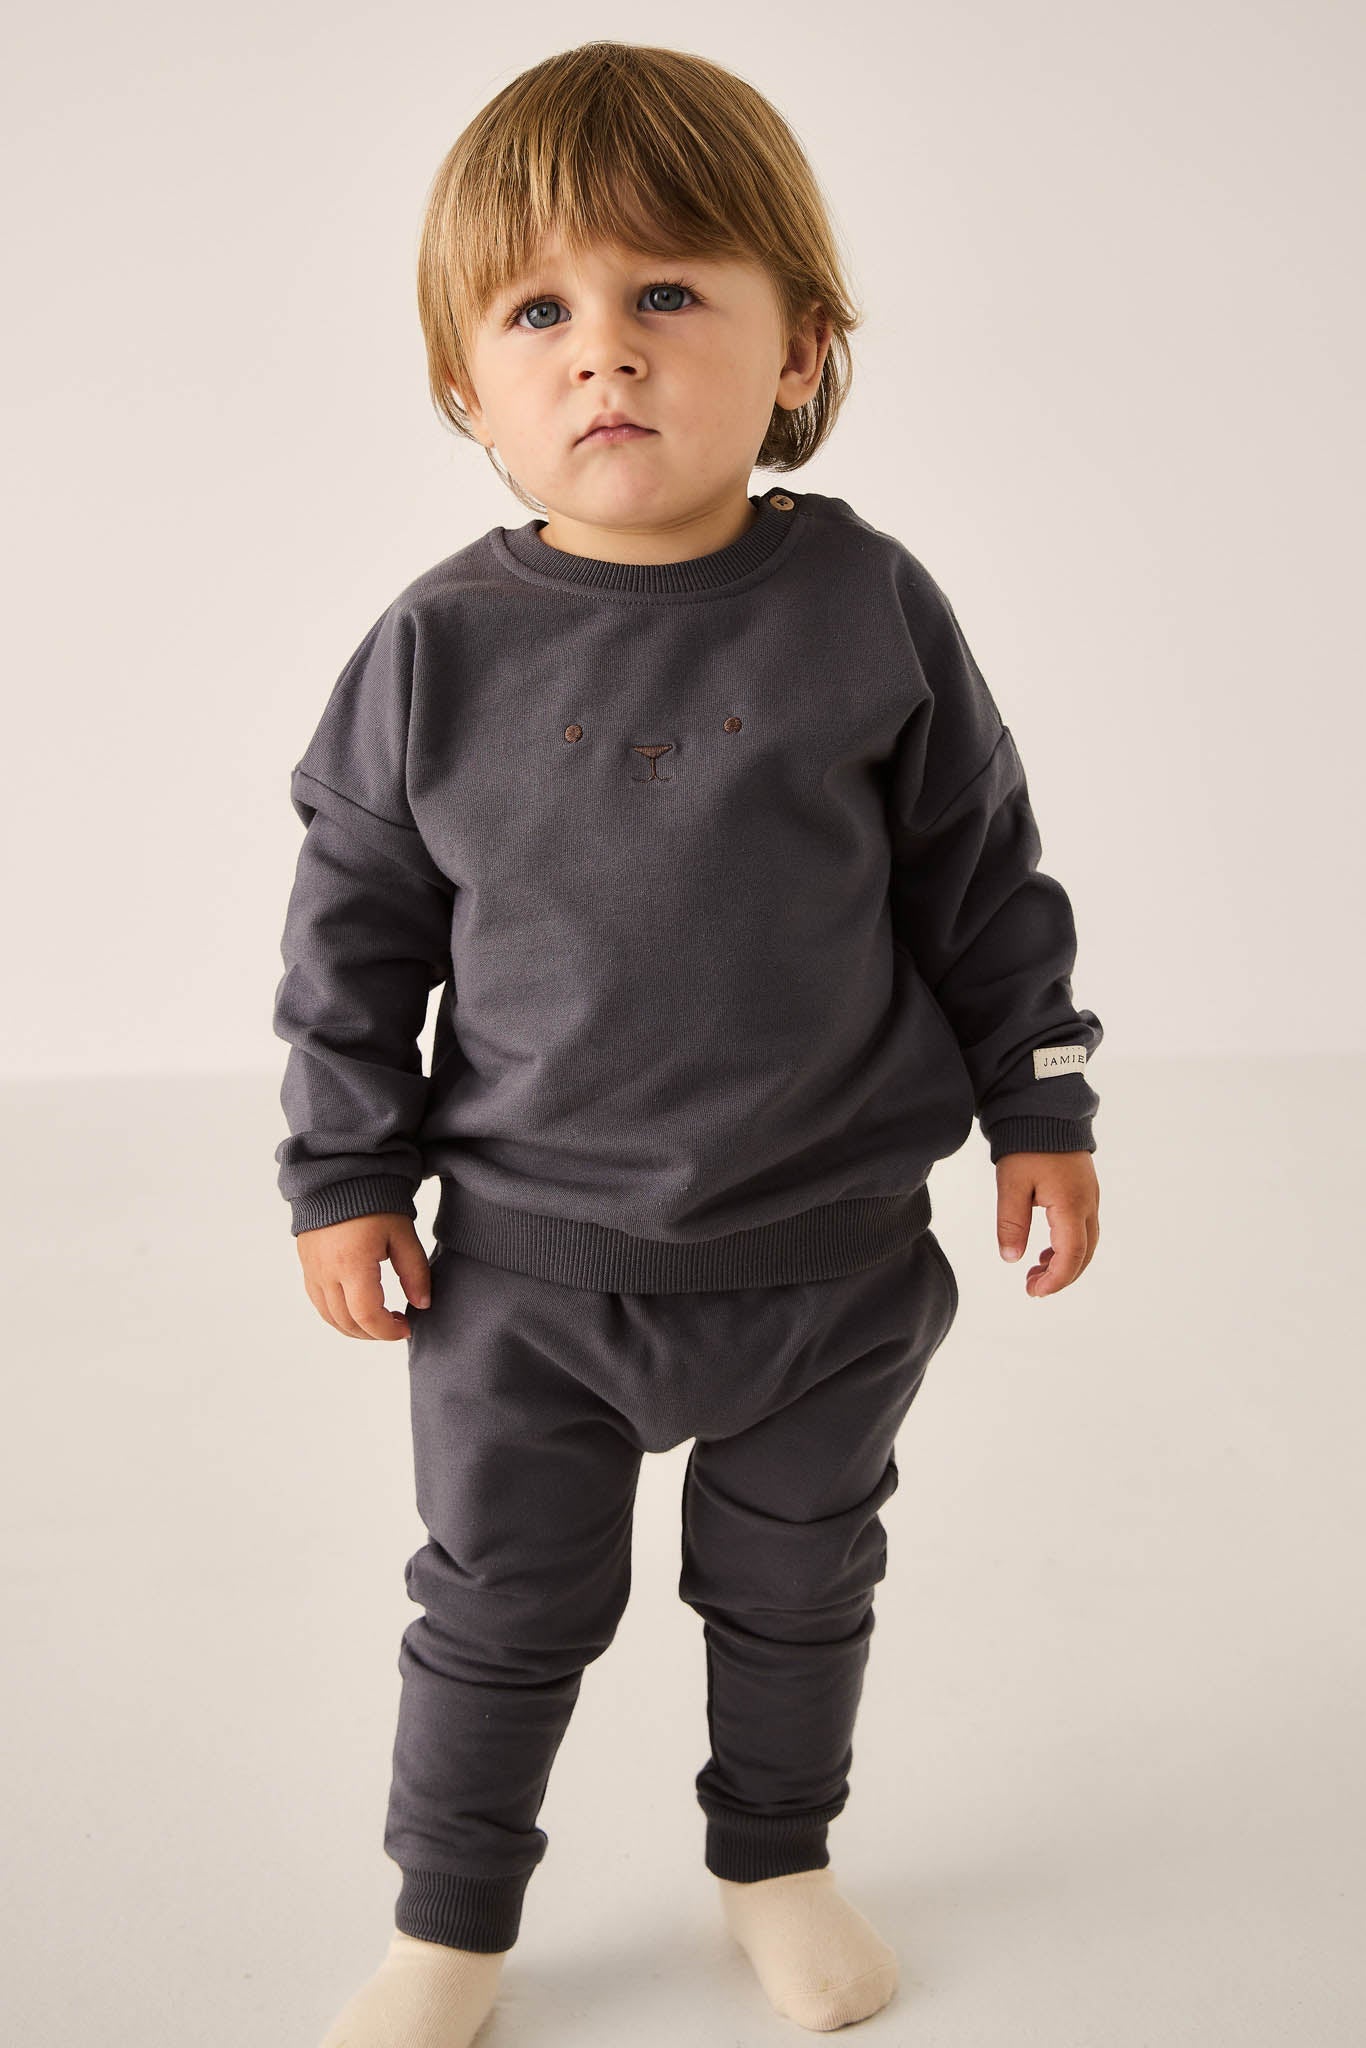 Organic Cotton Morgan Track Pant - Arctic-Clothing & Accessories-Jamie Kay-The Bay Room